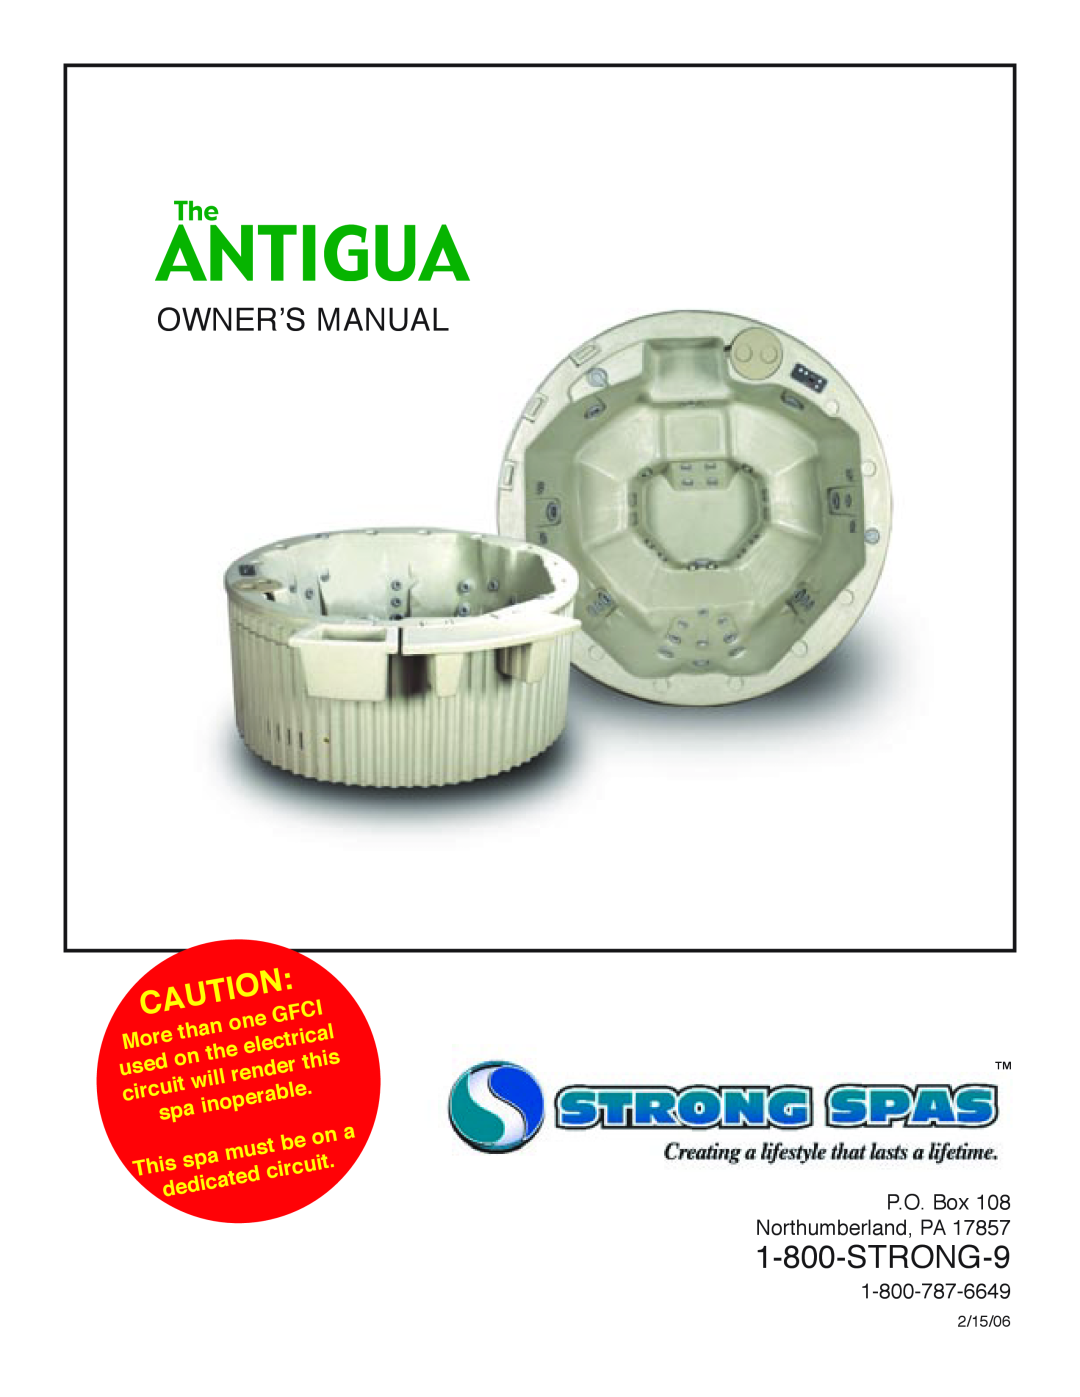 Strong Pools and Spas The Antigua owner manual STRONG-9, than, Gfci, More, electrical, used, this, render, will, circuit 